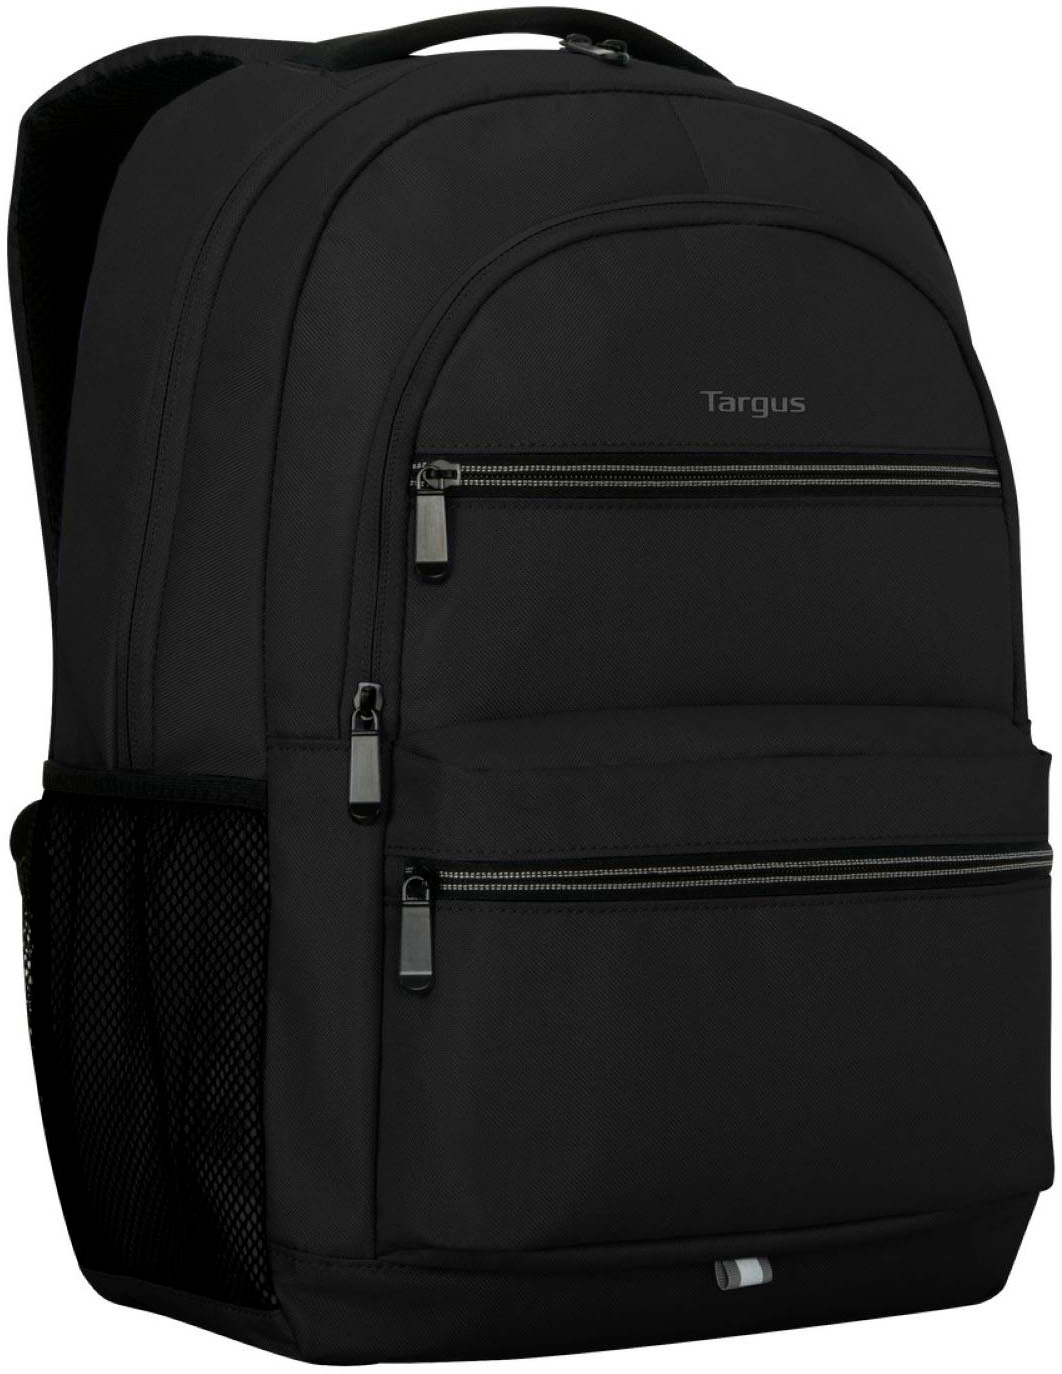 Angle View: Targus - Octave II Backpack for 15.6” Laptops - Black